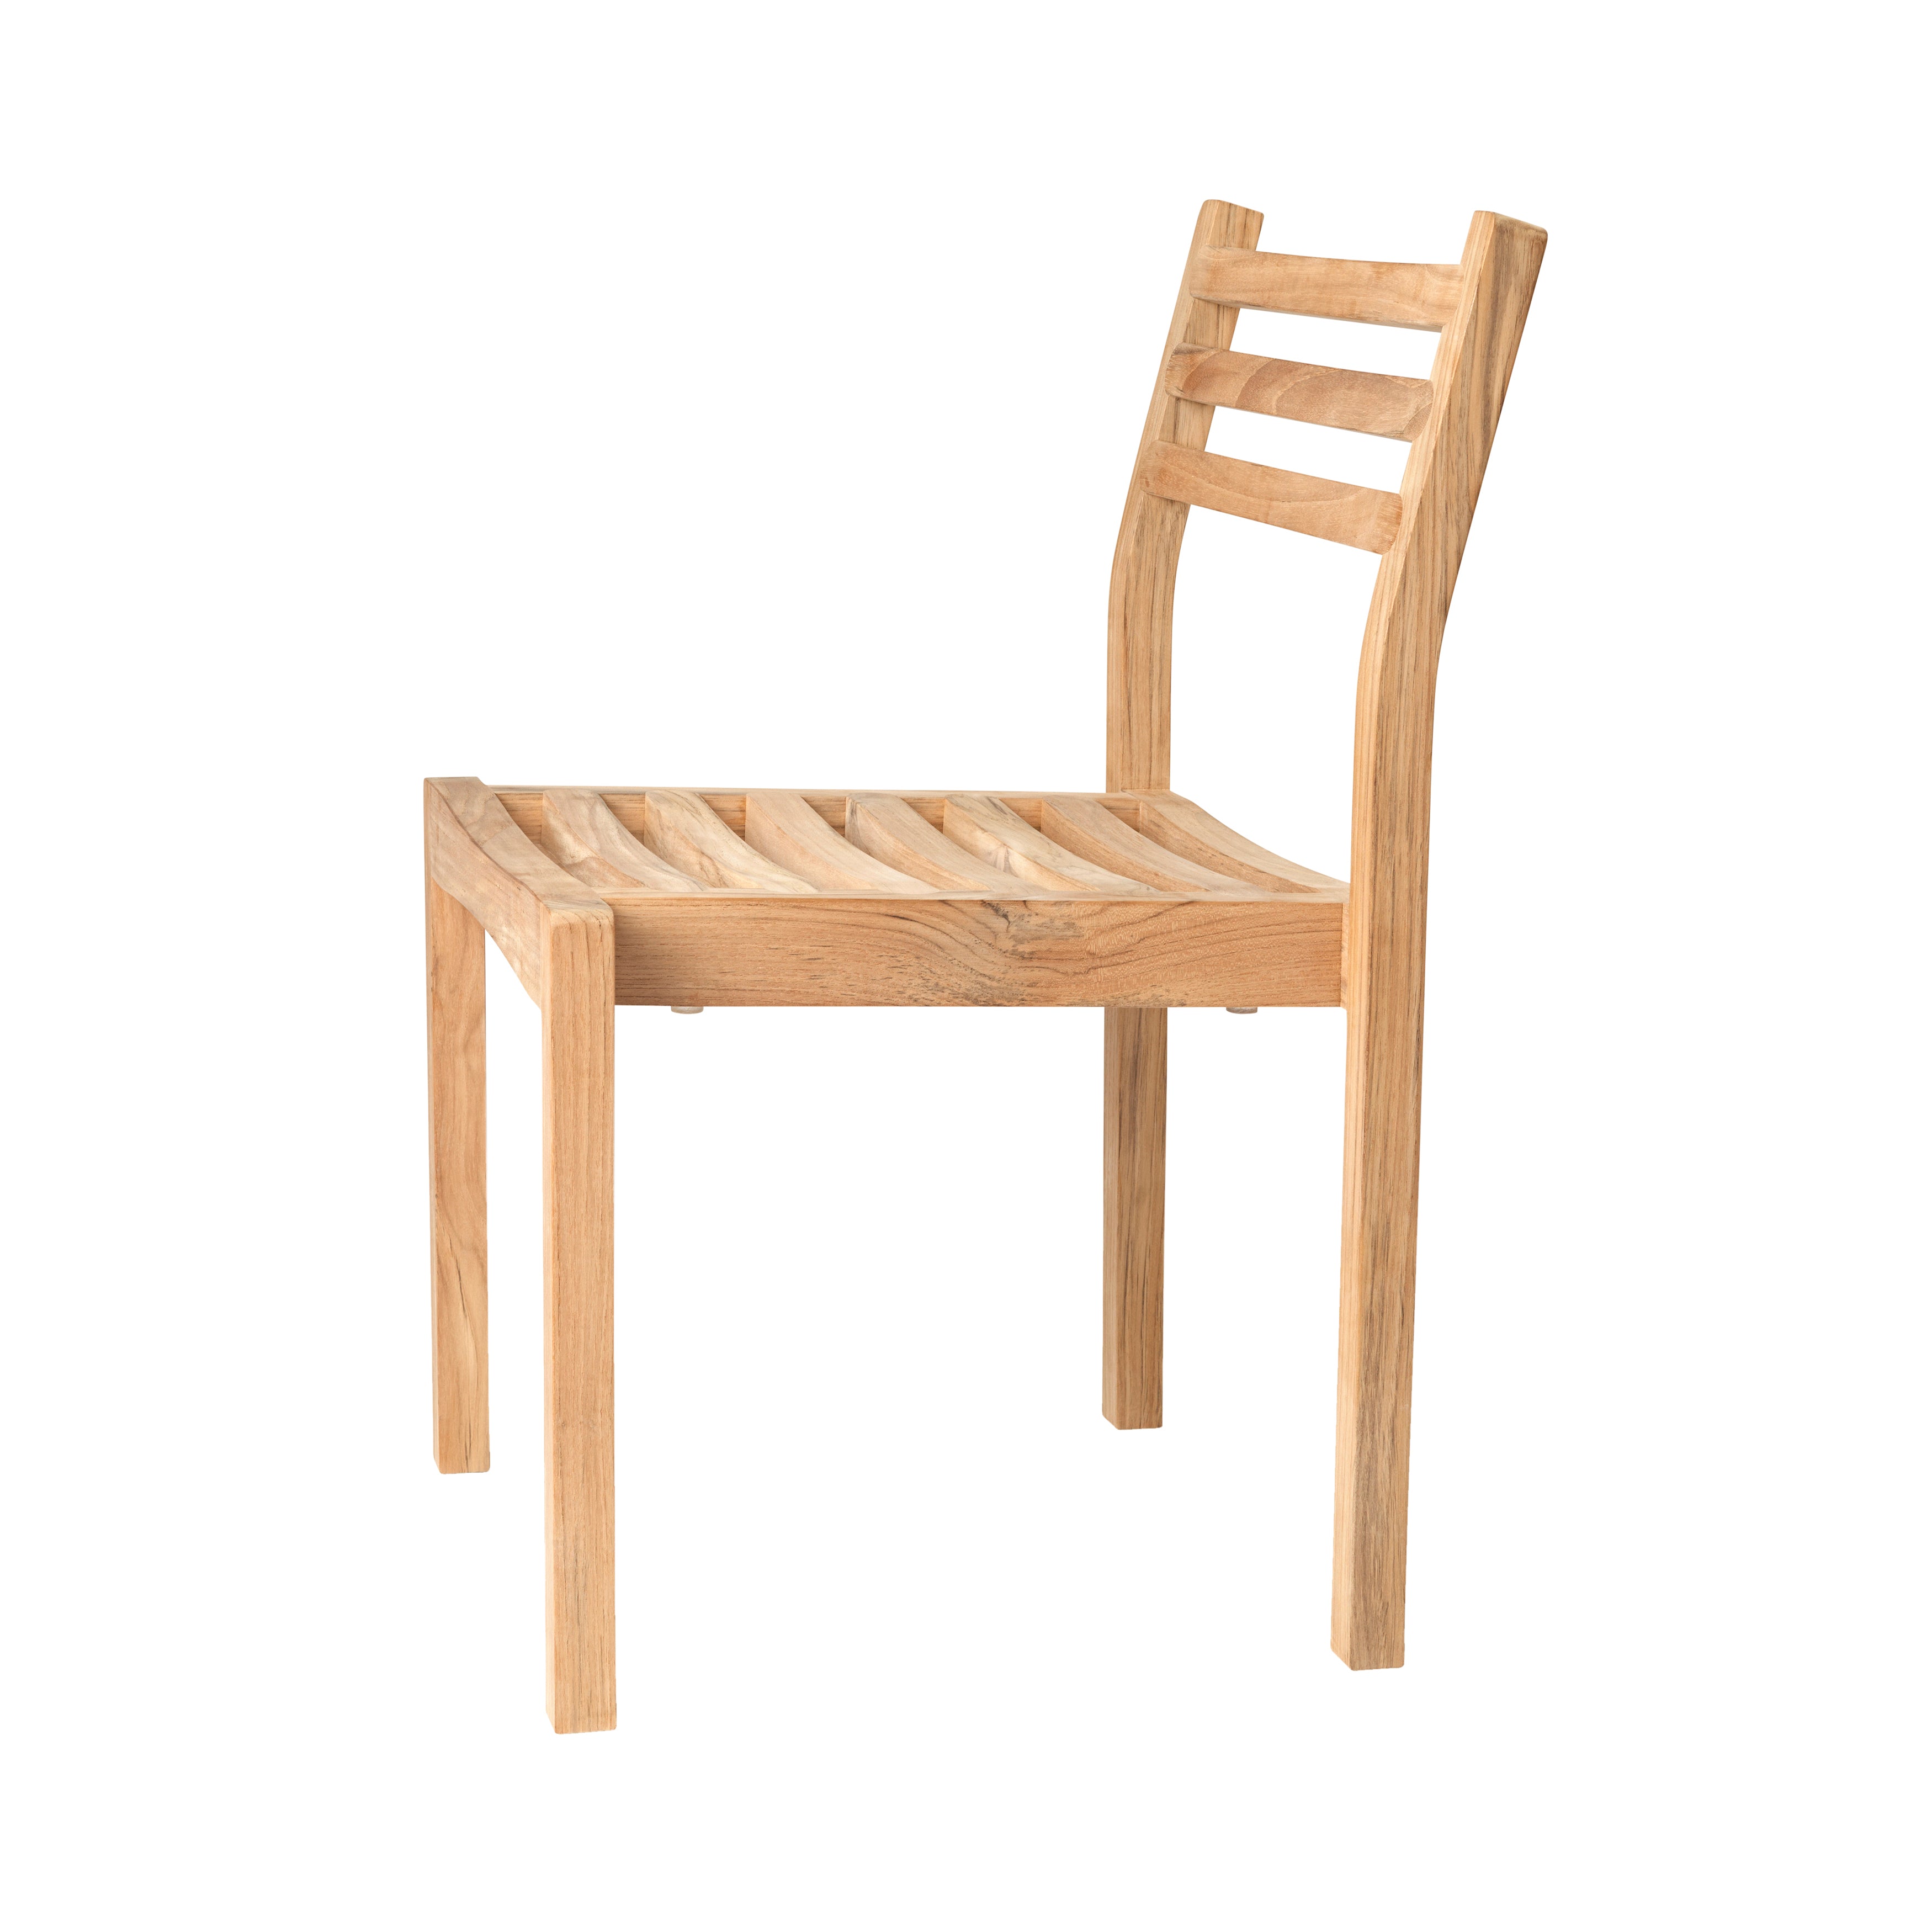 AH501 Outdoor Dining Chair: Without Cushion